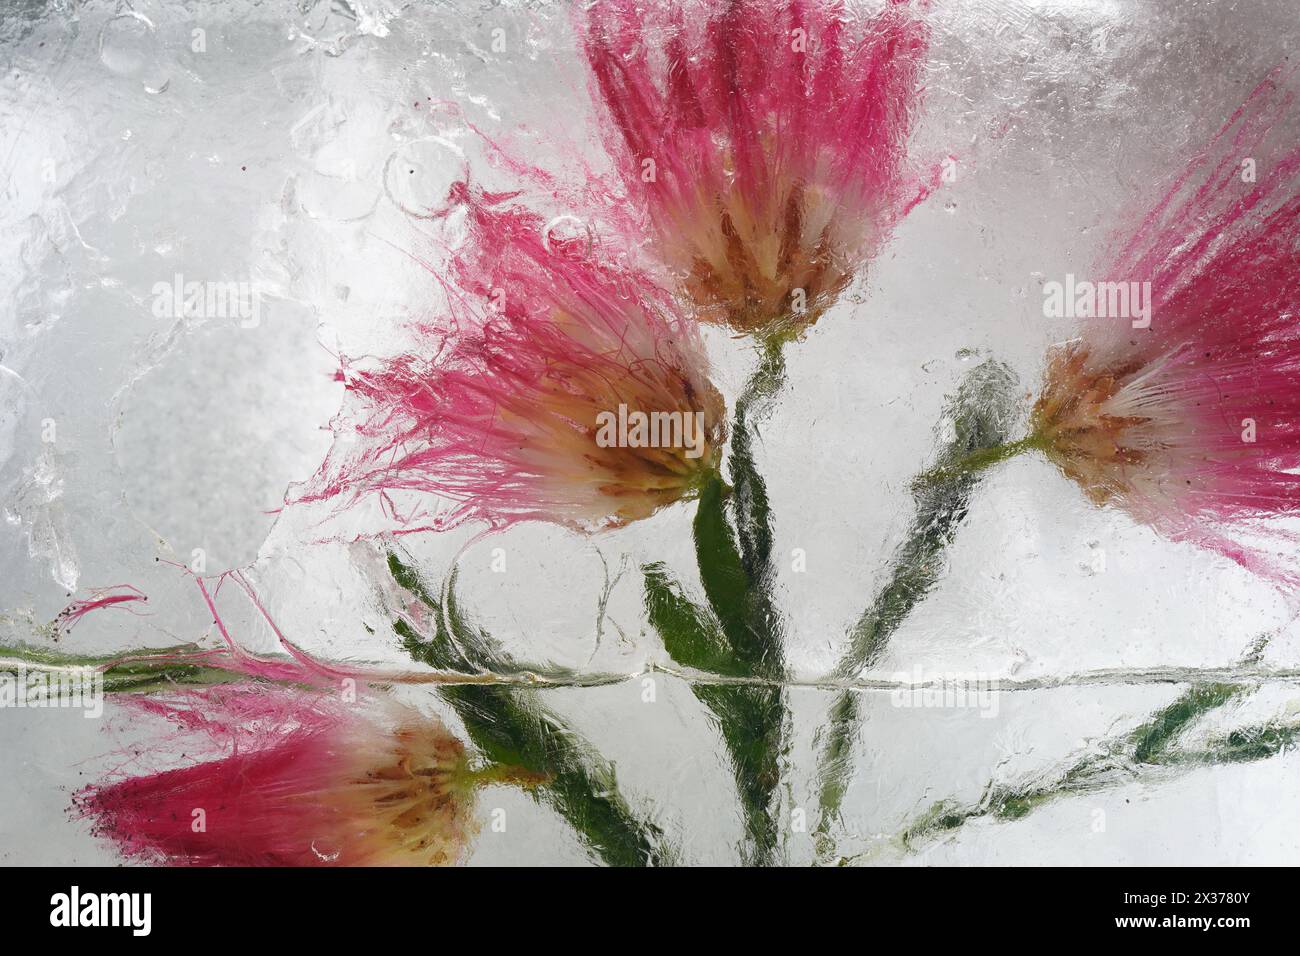 Background of a flower in ice with air bubbles. Stock Photo